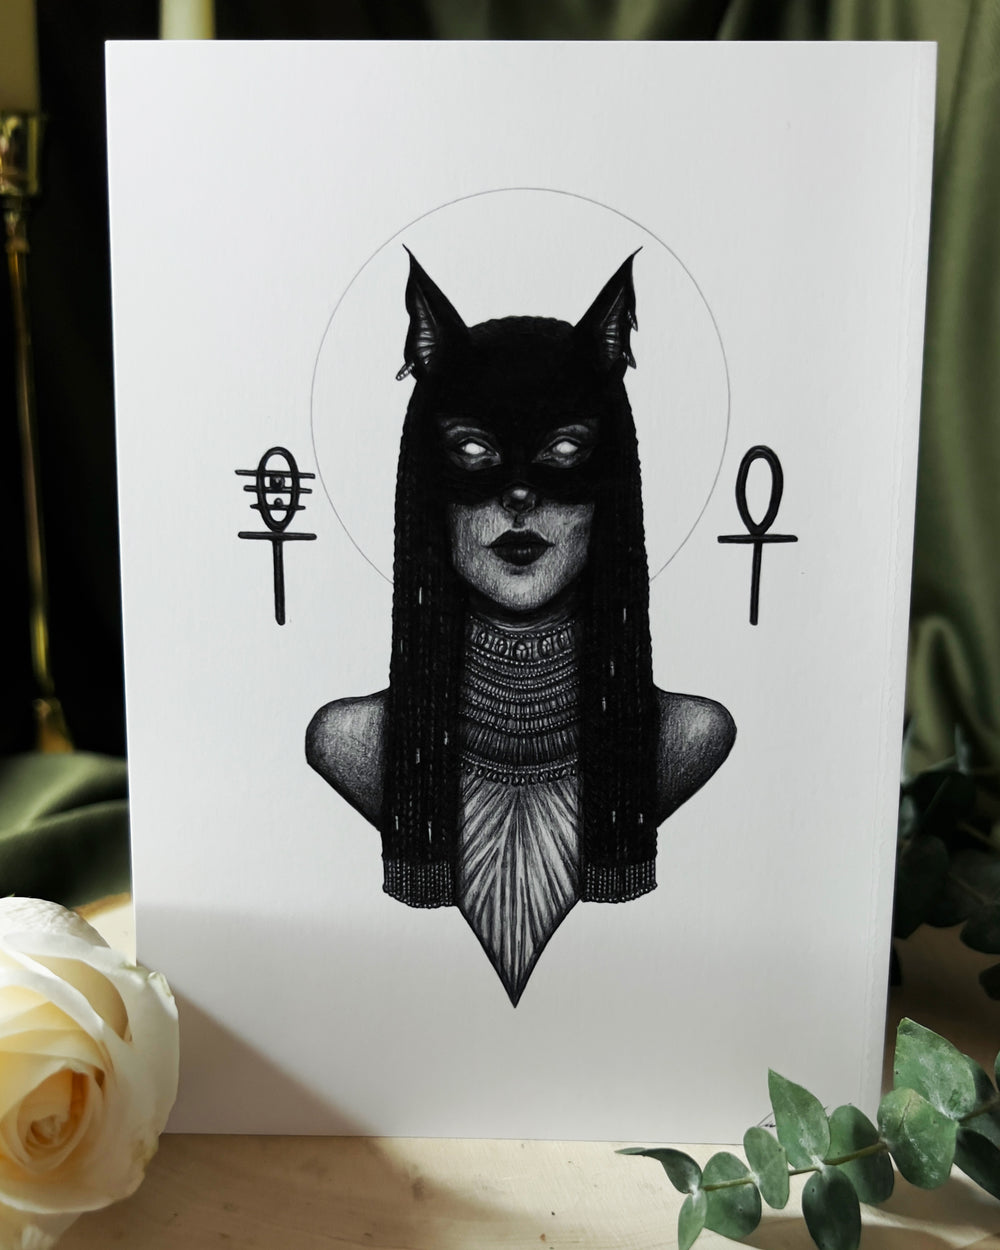 Art print depicting the goddess Bastet with a cat mask covering her eyes and beads around her neck.